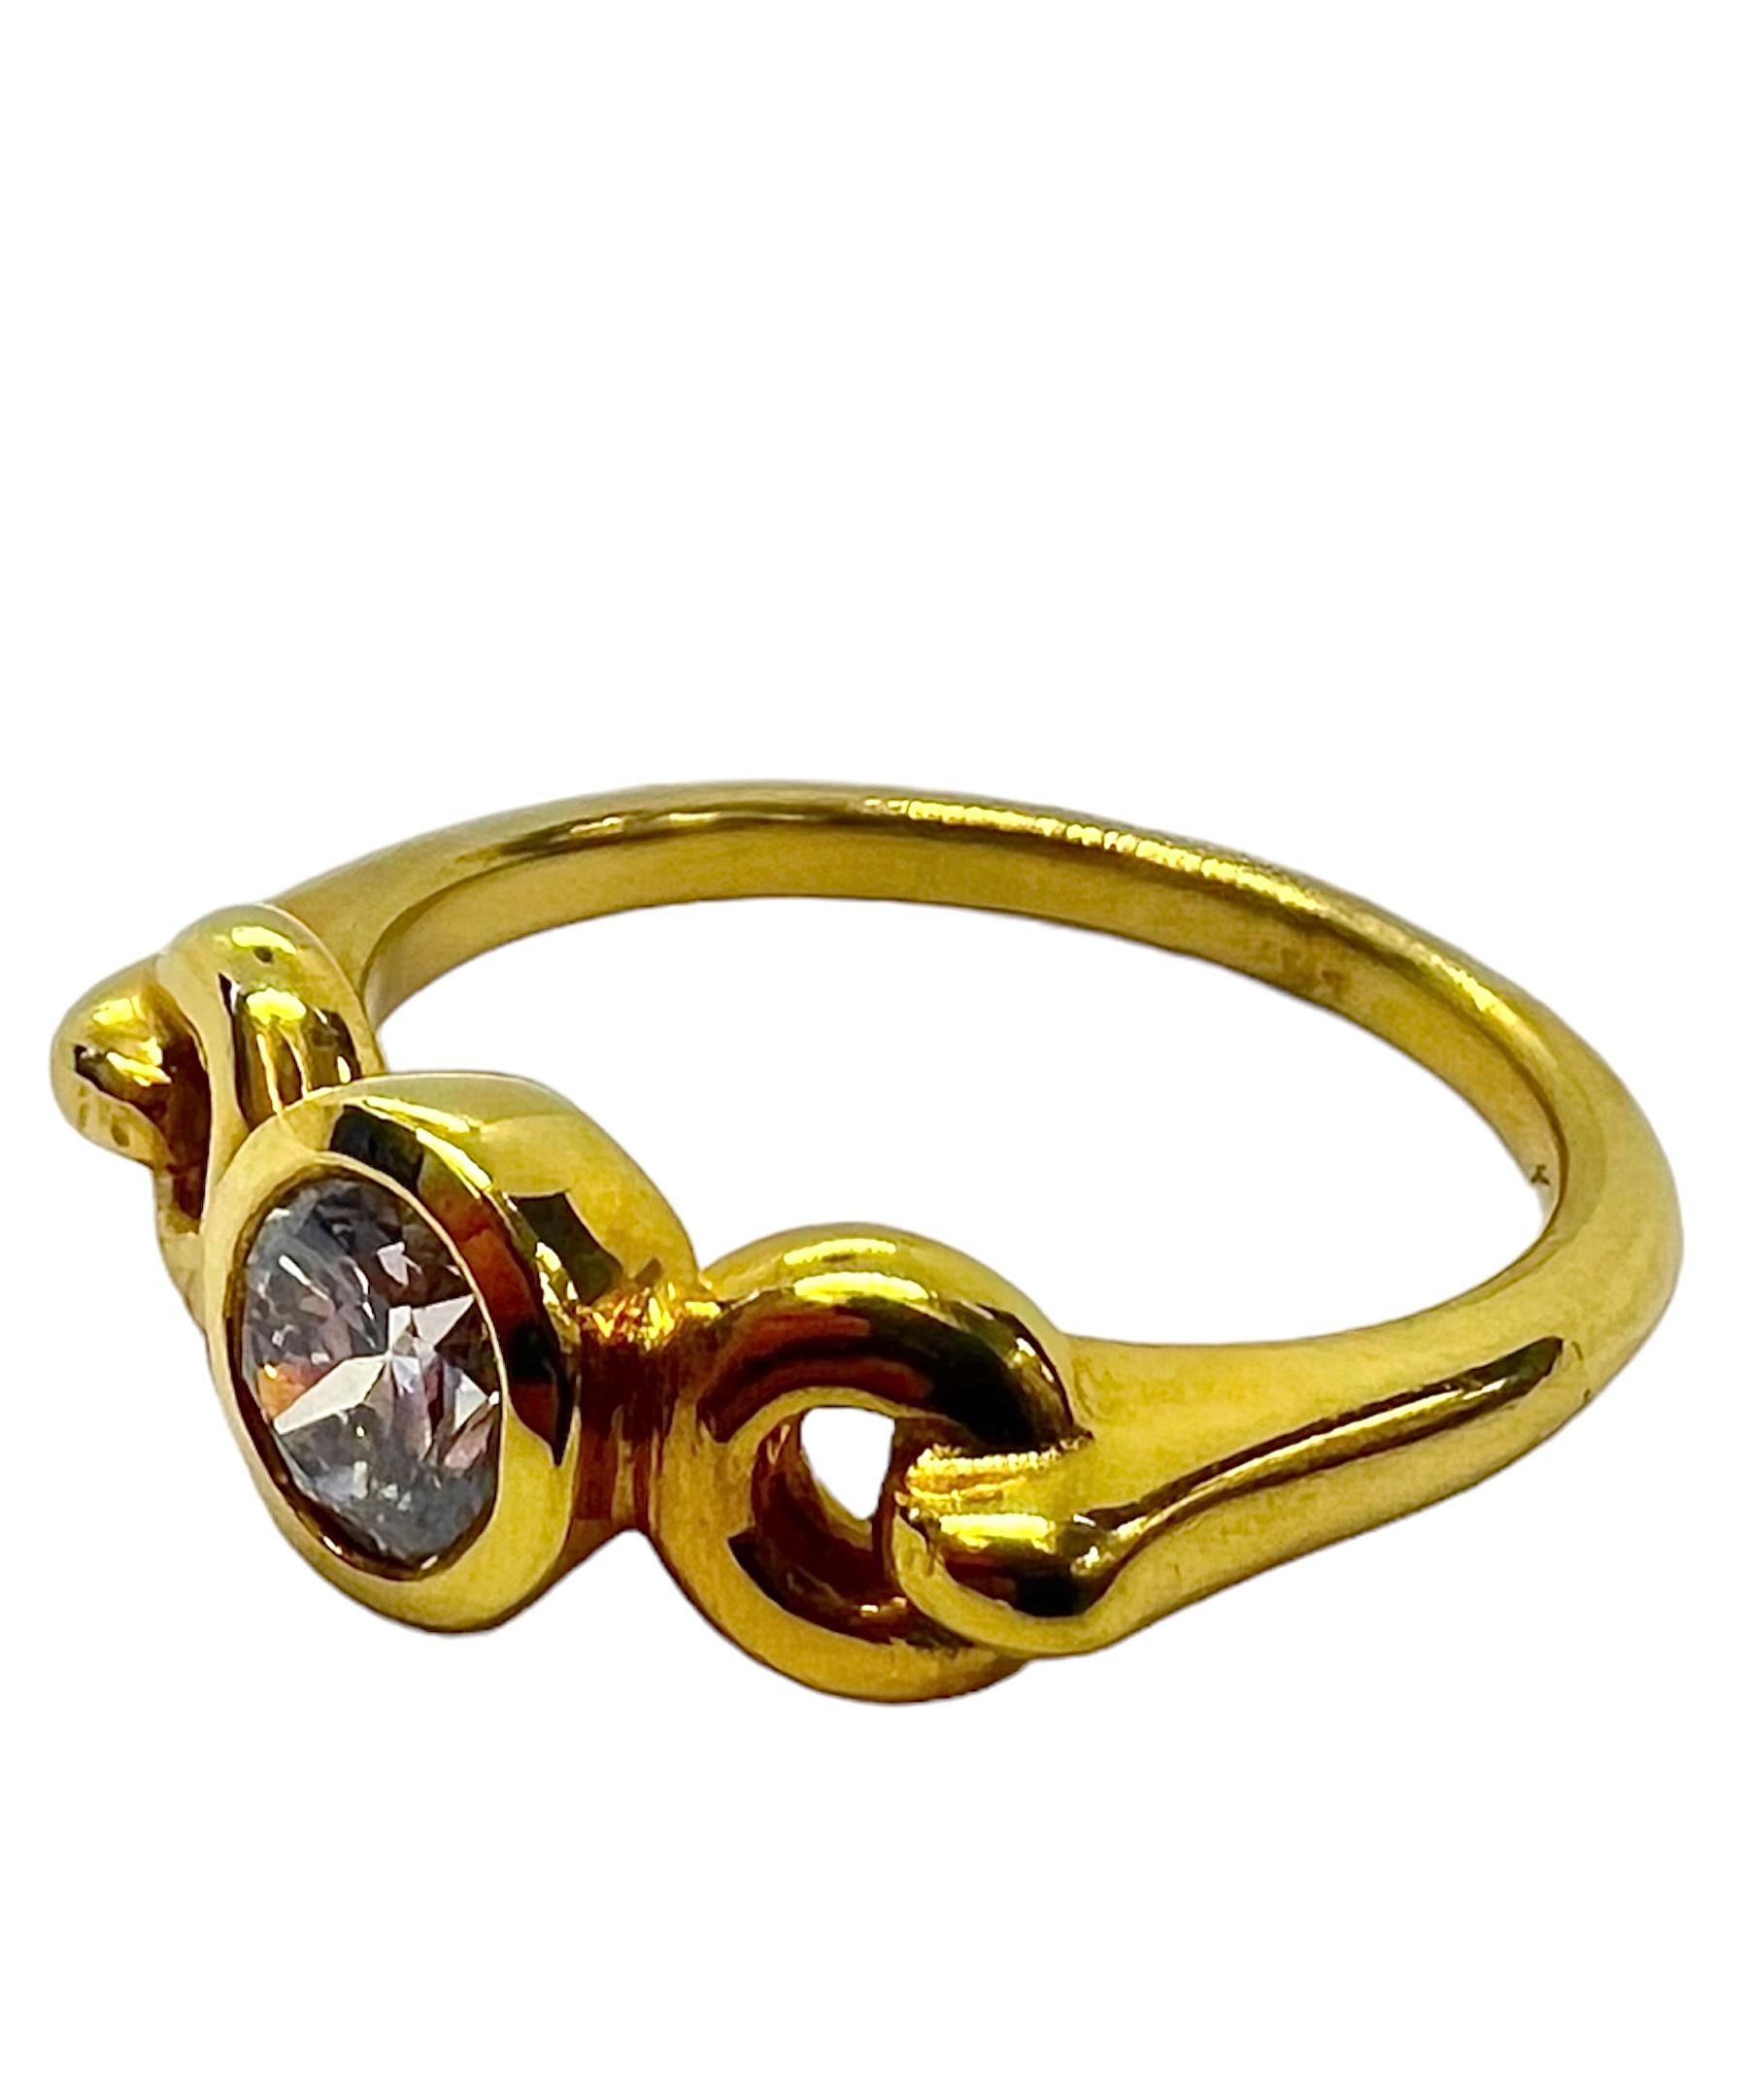 18K yellow gold with round diamond.

Sophia D by Joseph Dardashti LTD has been known worldwide for 35 years and are inspired by classic Art Deco design that merges with modern manufacturing techniques. 